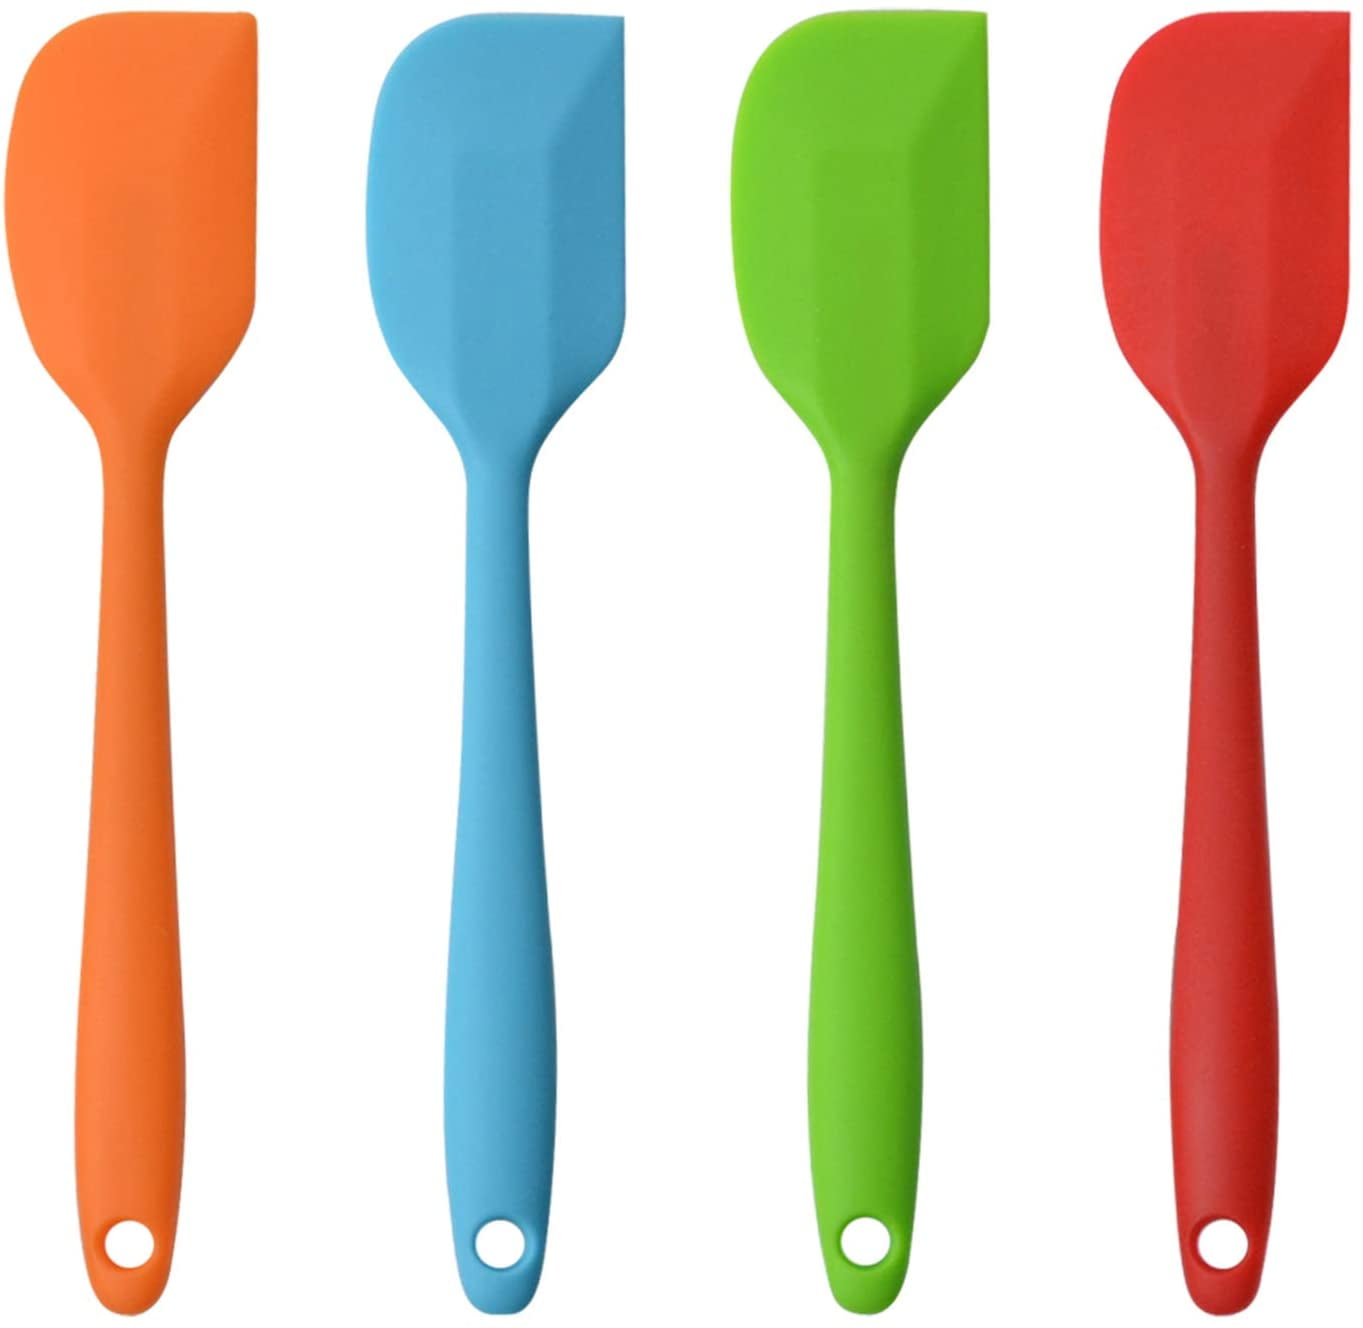 Set of 4 500°F Heat Resistant Seamless Rubber Spatulas with Stainless Steel Core Kitchen Utensils Non-Stick for Cooking Baking and Mixing MOACC Silicone Spatula 